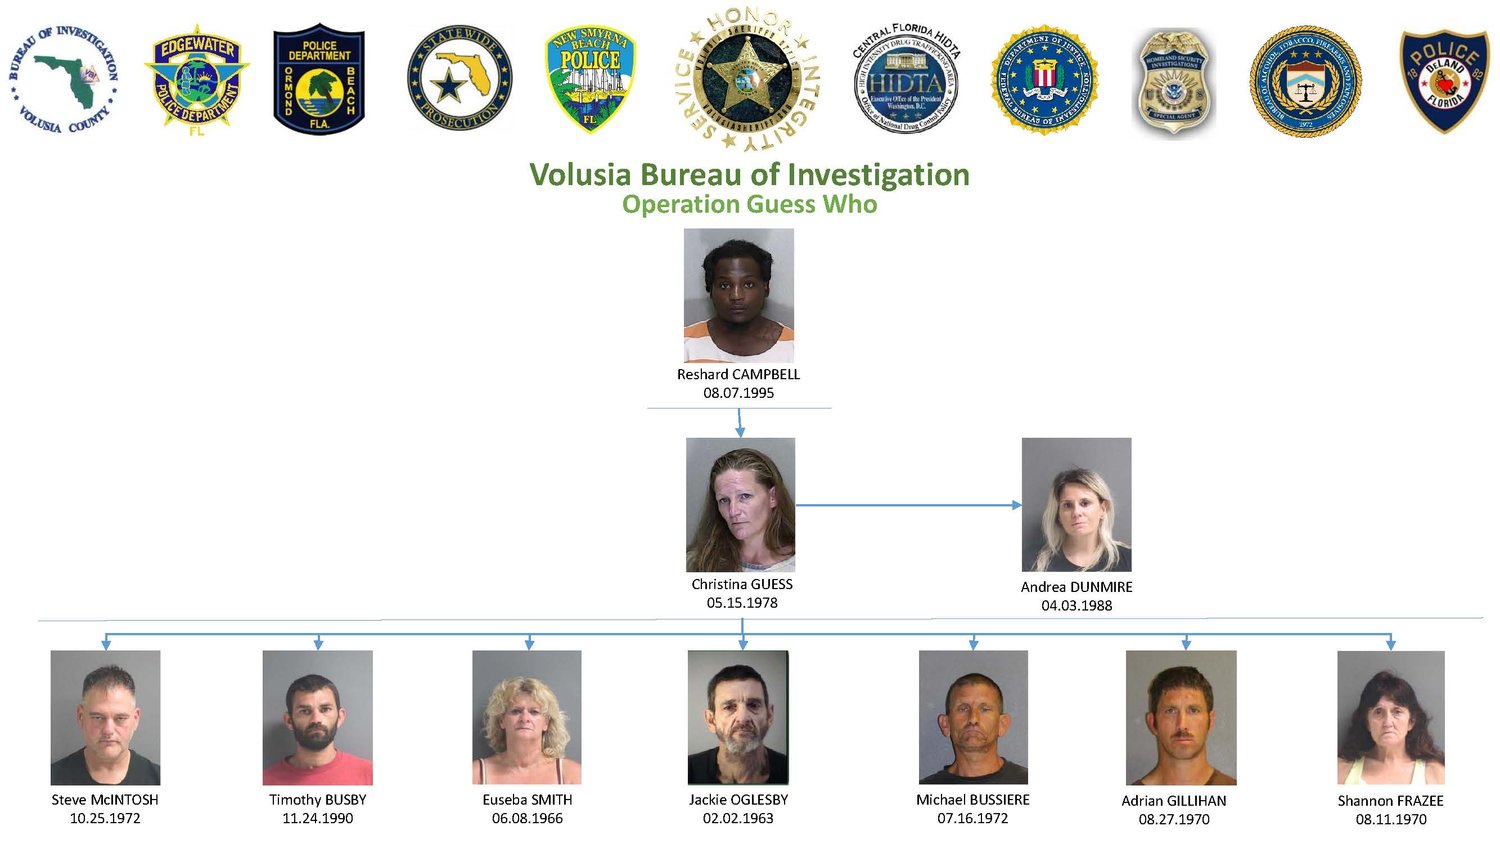 The organization of the drug ring, as presented by the VSO.